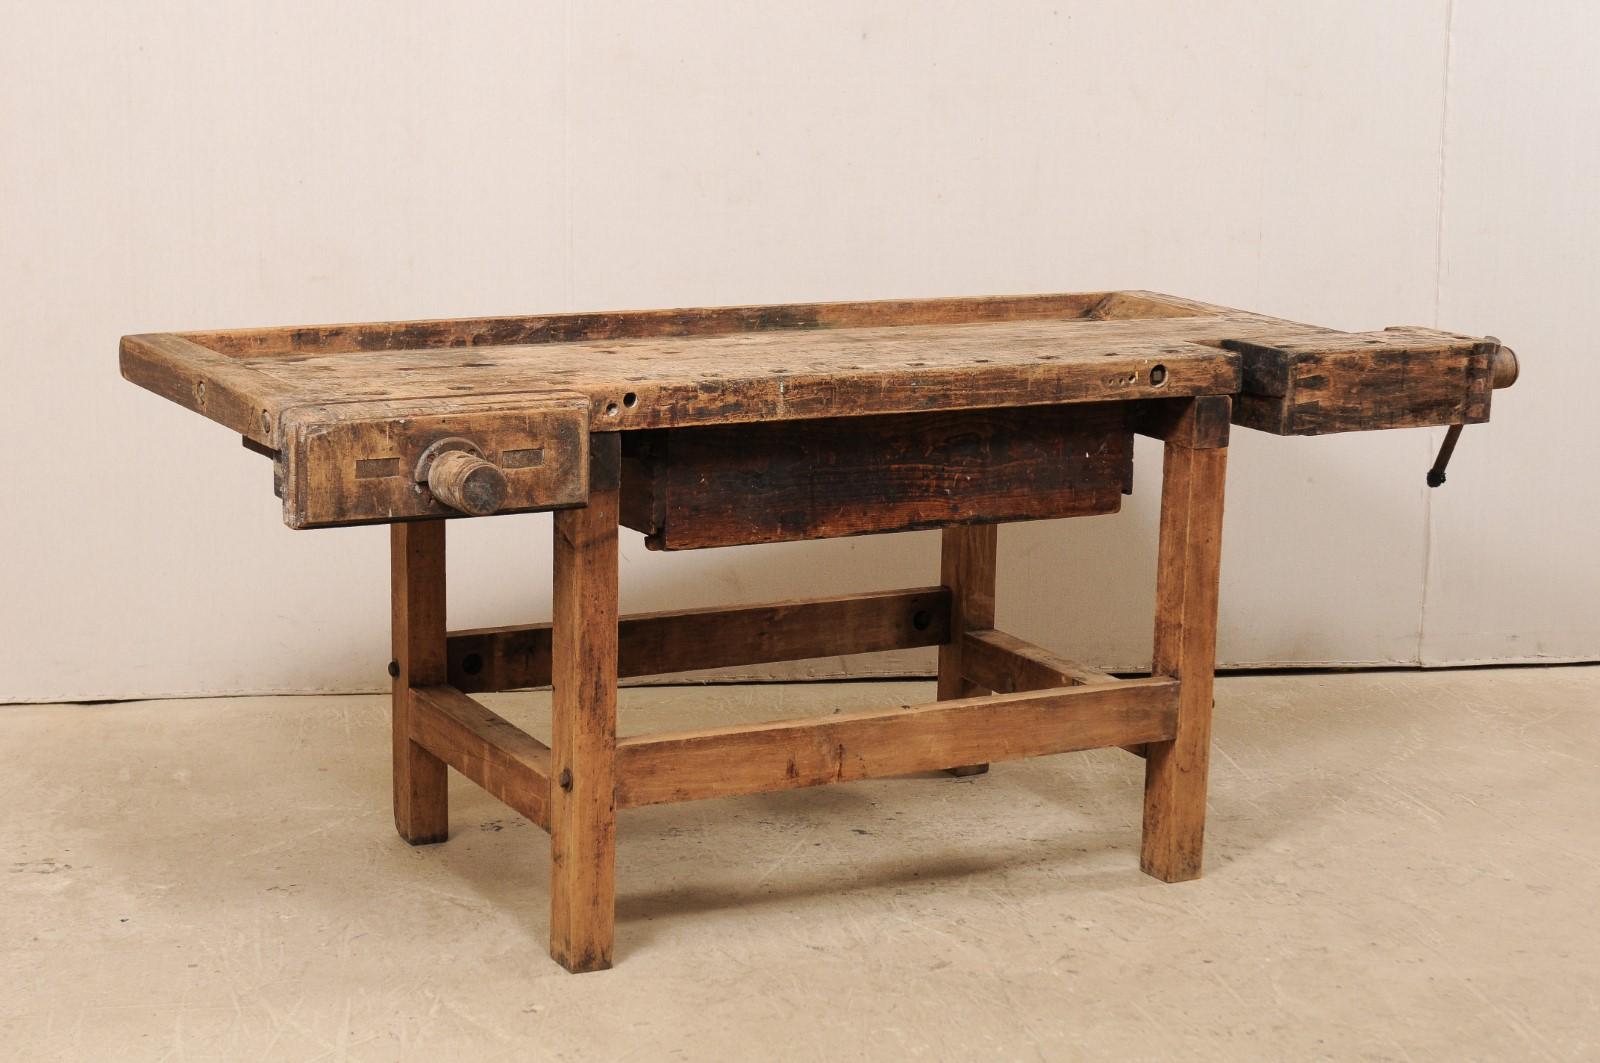 An American work bench table with large drawer from the early 20th century. This antique workbench from Bethlehem, Pennsylvania (as hand-marked at underside) has a thick, rectangular-shaped top with raised lip around all sides, large adjustable